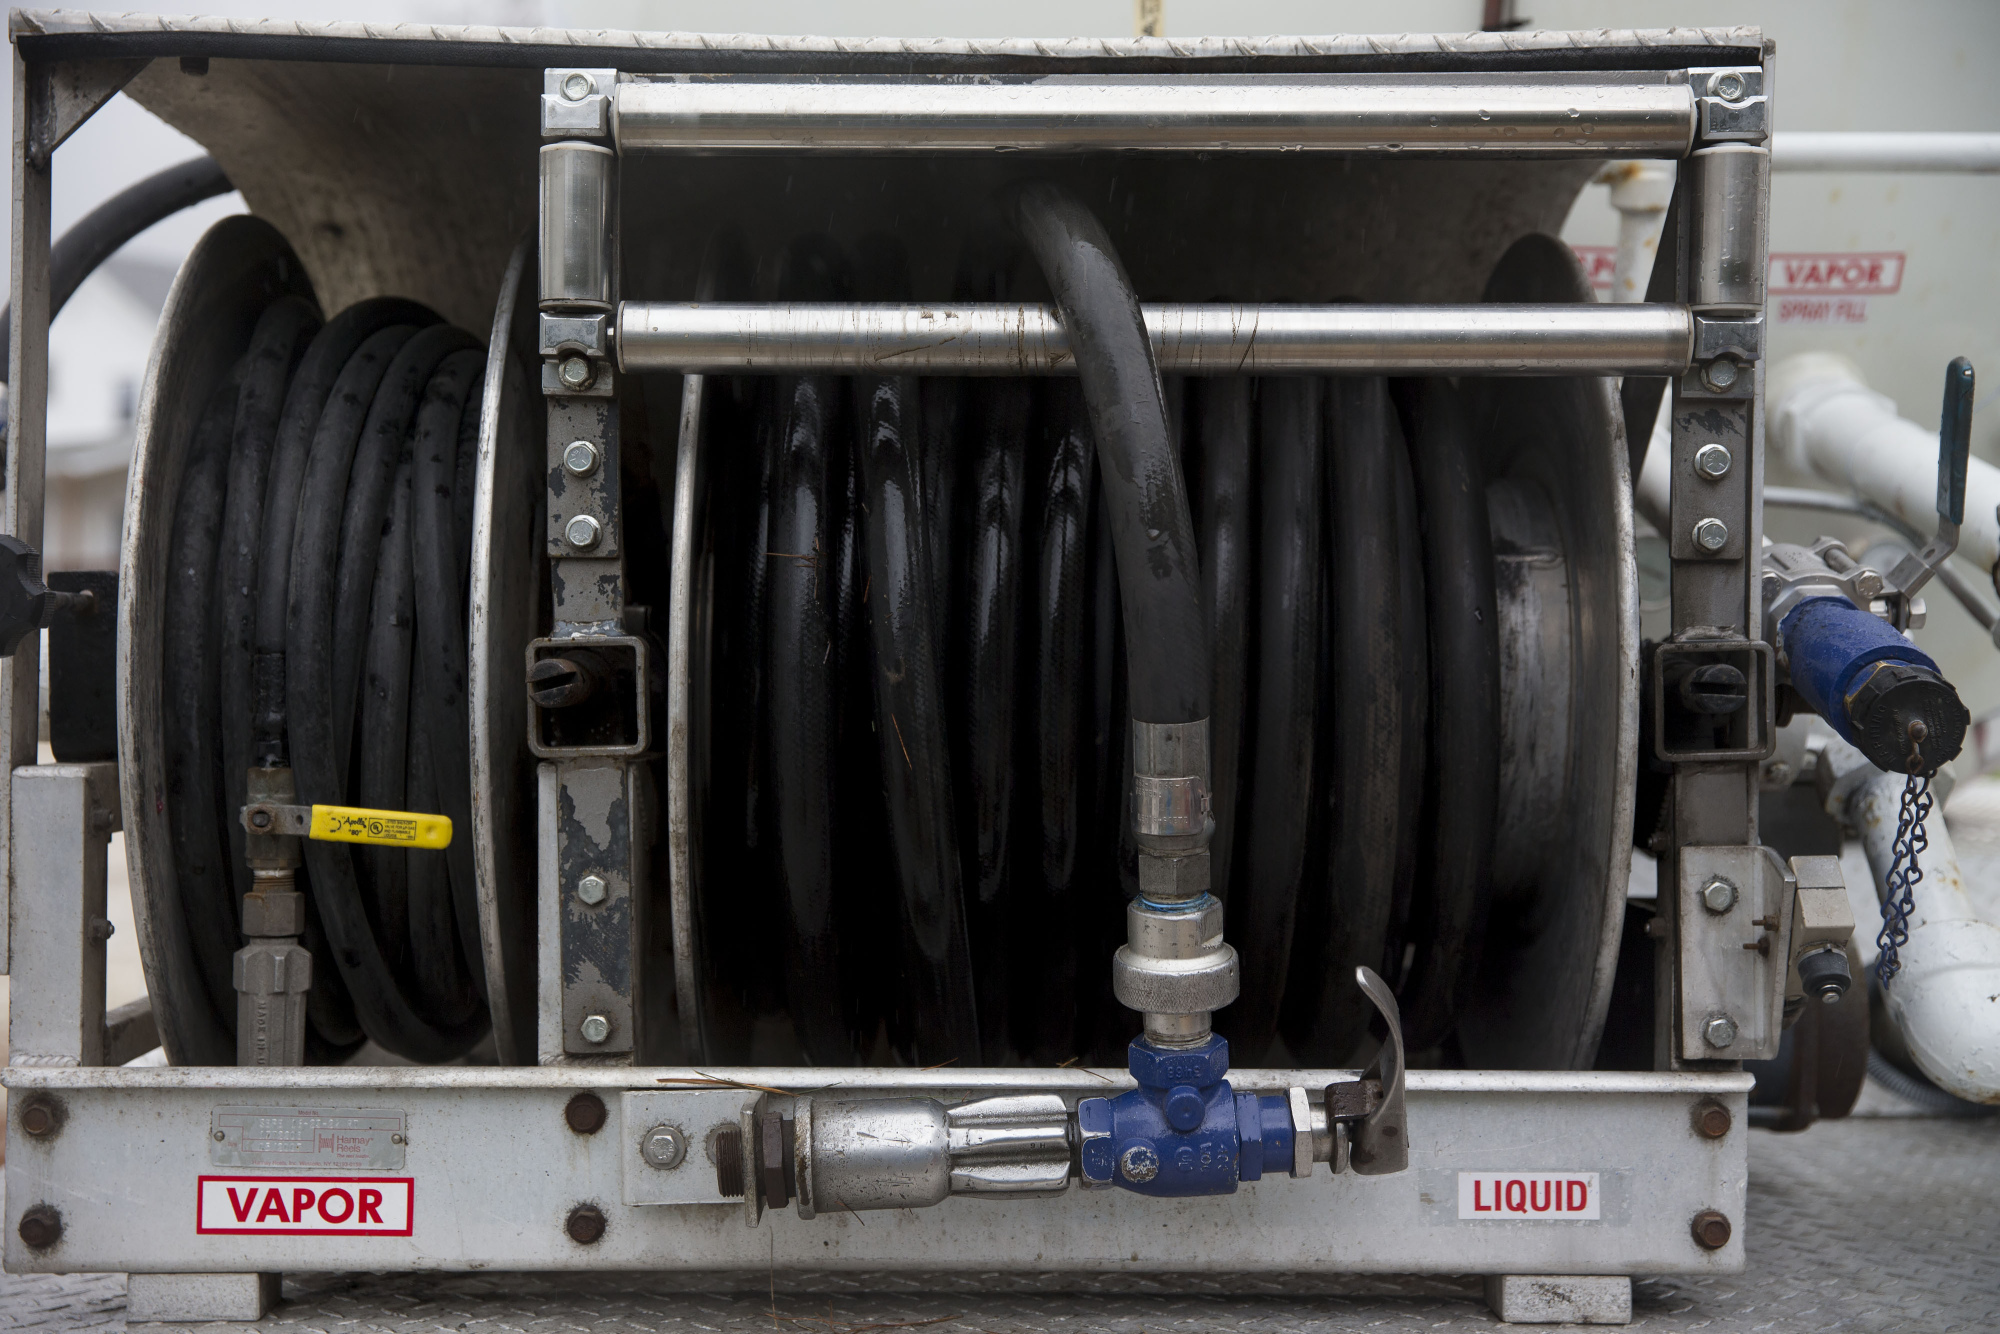 A fuel hose sits in its carrier on the back of a Michlig Energy liquid propane gas truck during delivery outside a home in Manlius, Illinois, U.S., on Monday, Dec. 14, 2015.  Photographer: Daniel Acker/Bloomberg